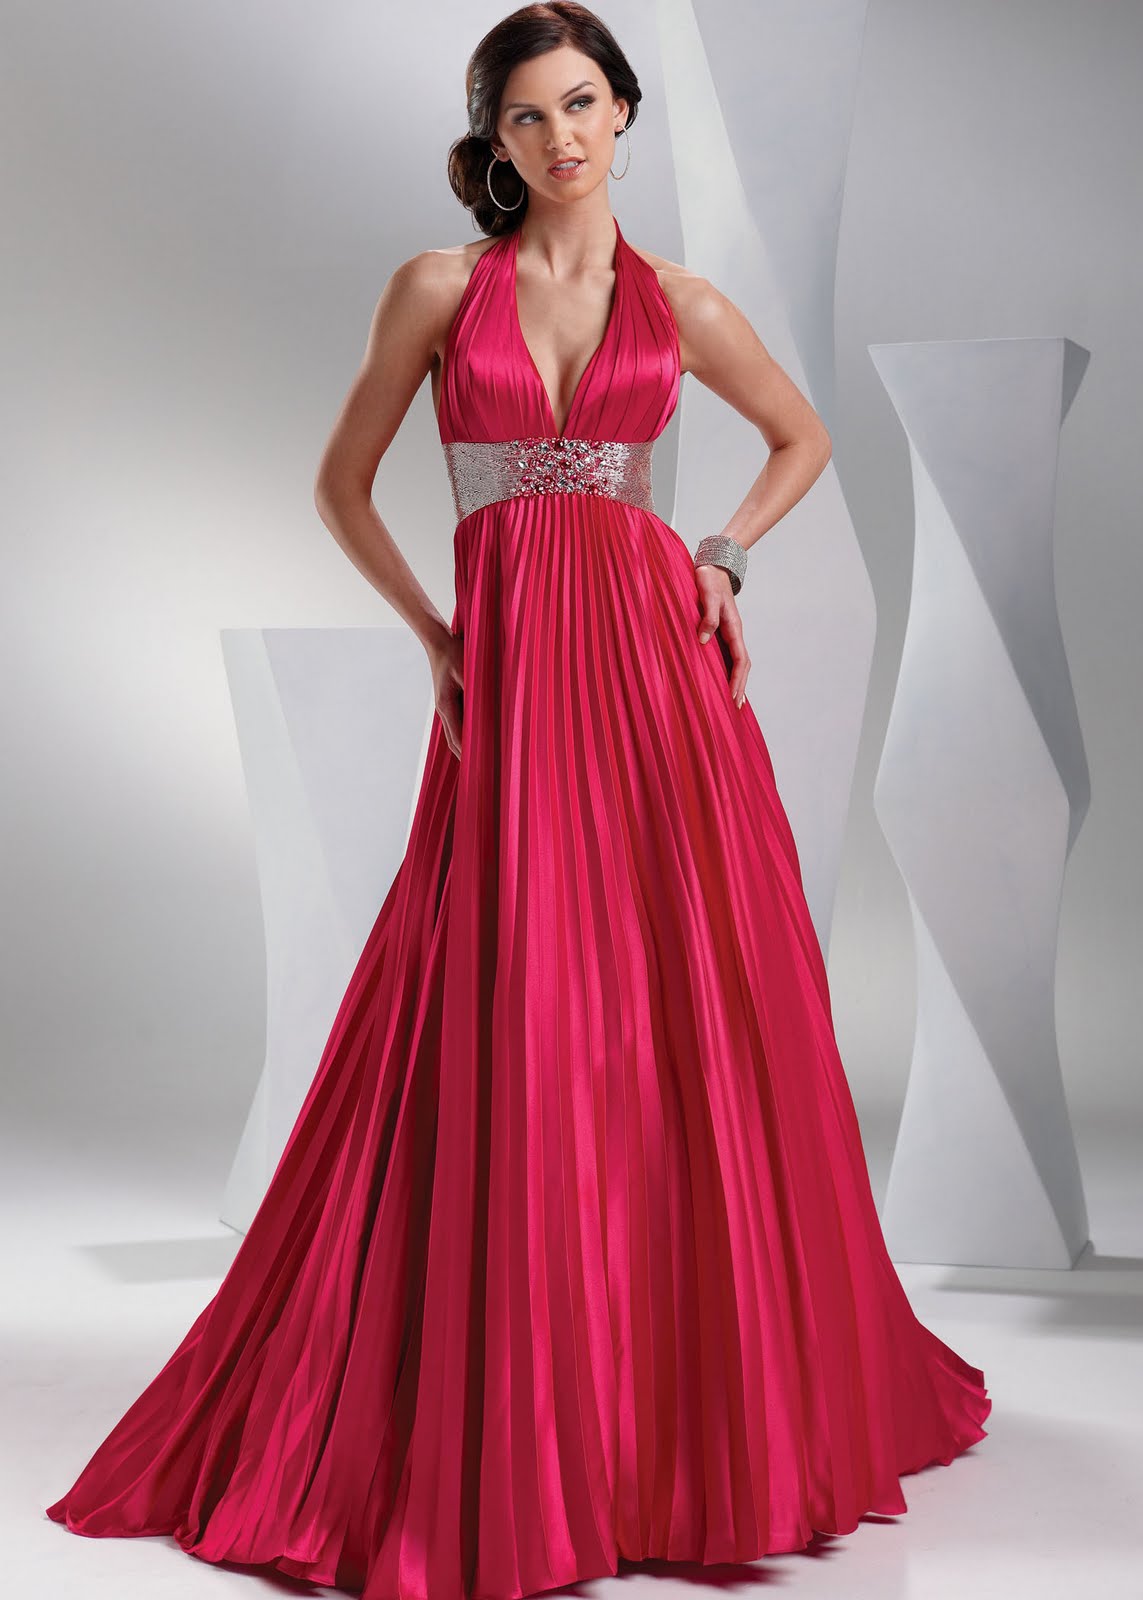 Plunging neck gown : The plunging neck gown means the gown which had ...